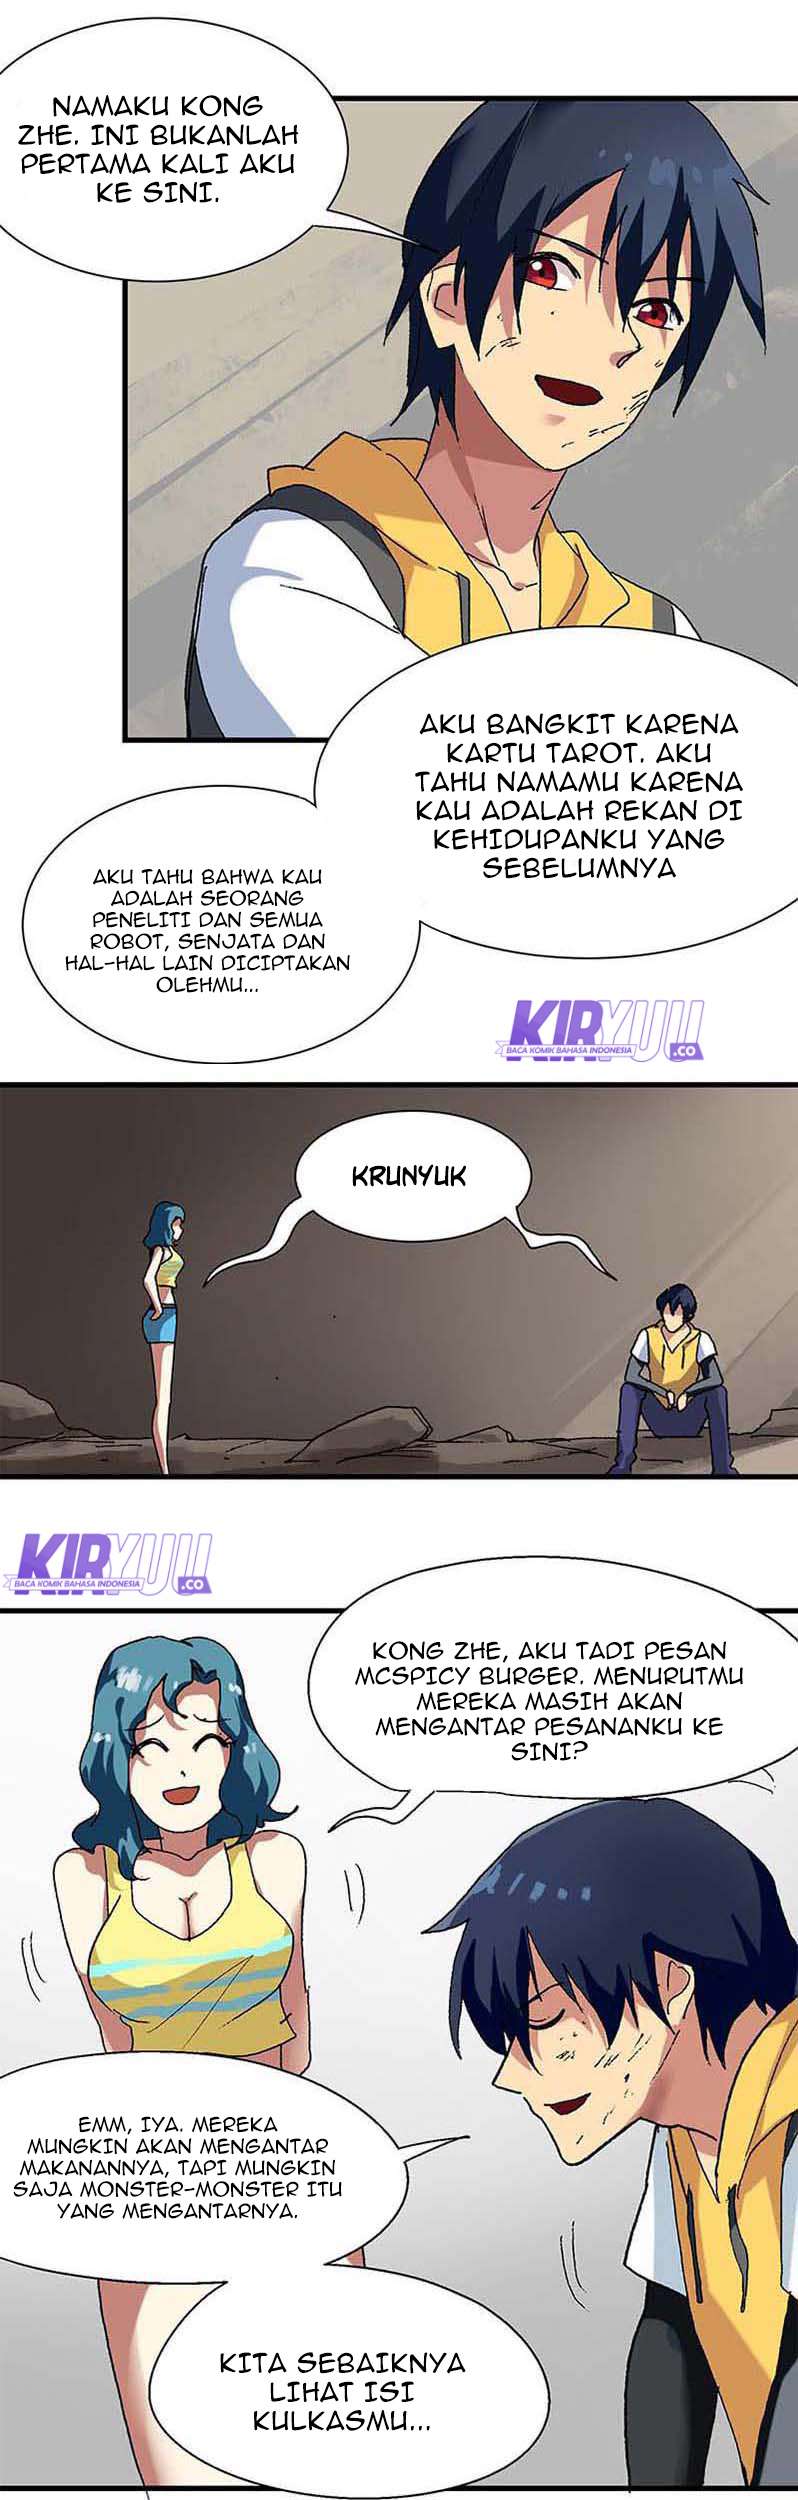 Starting From Zero in Doomsday Chapter 08